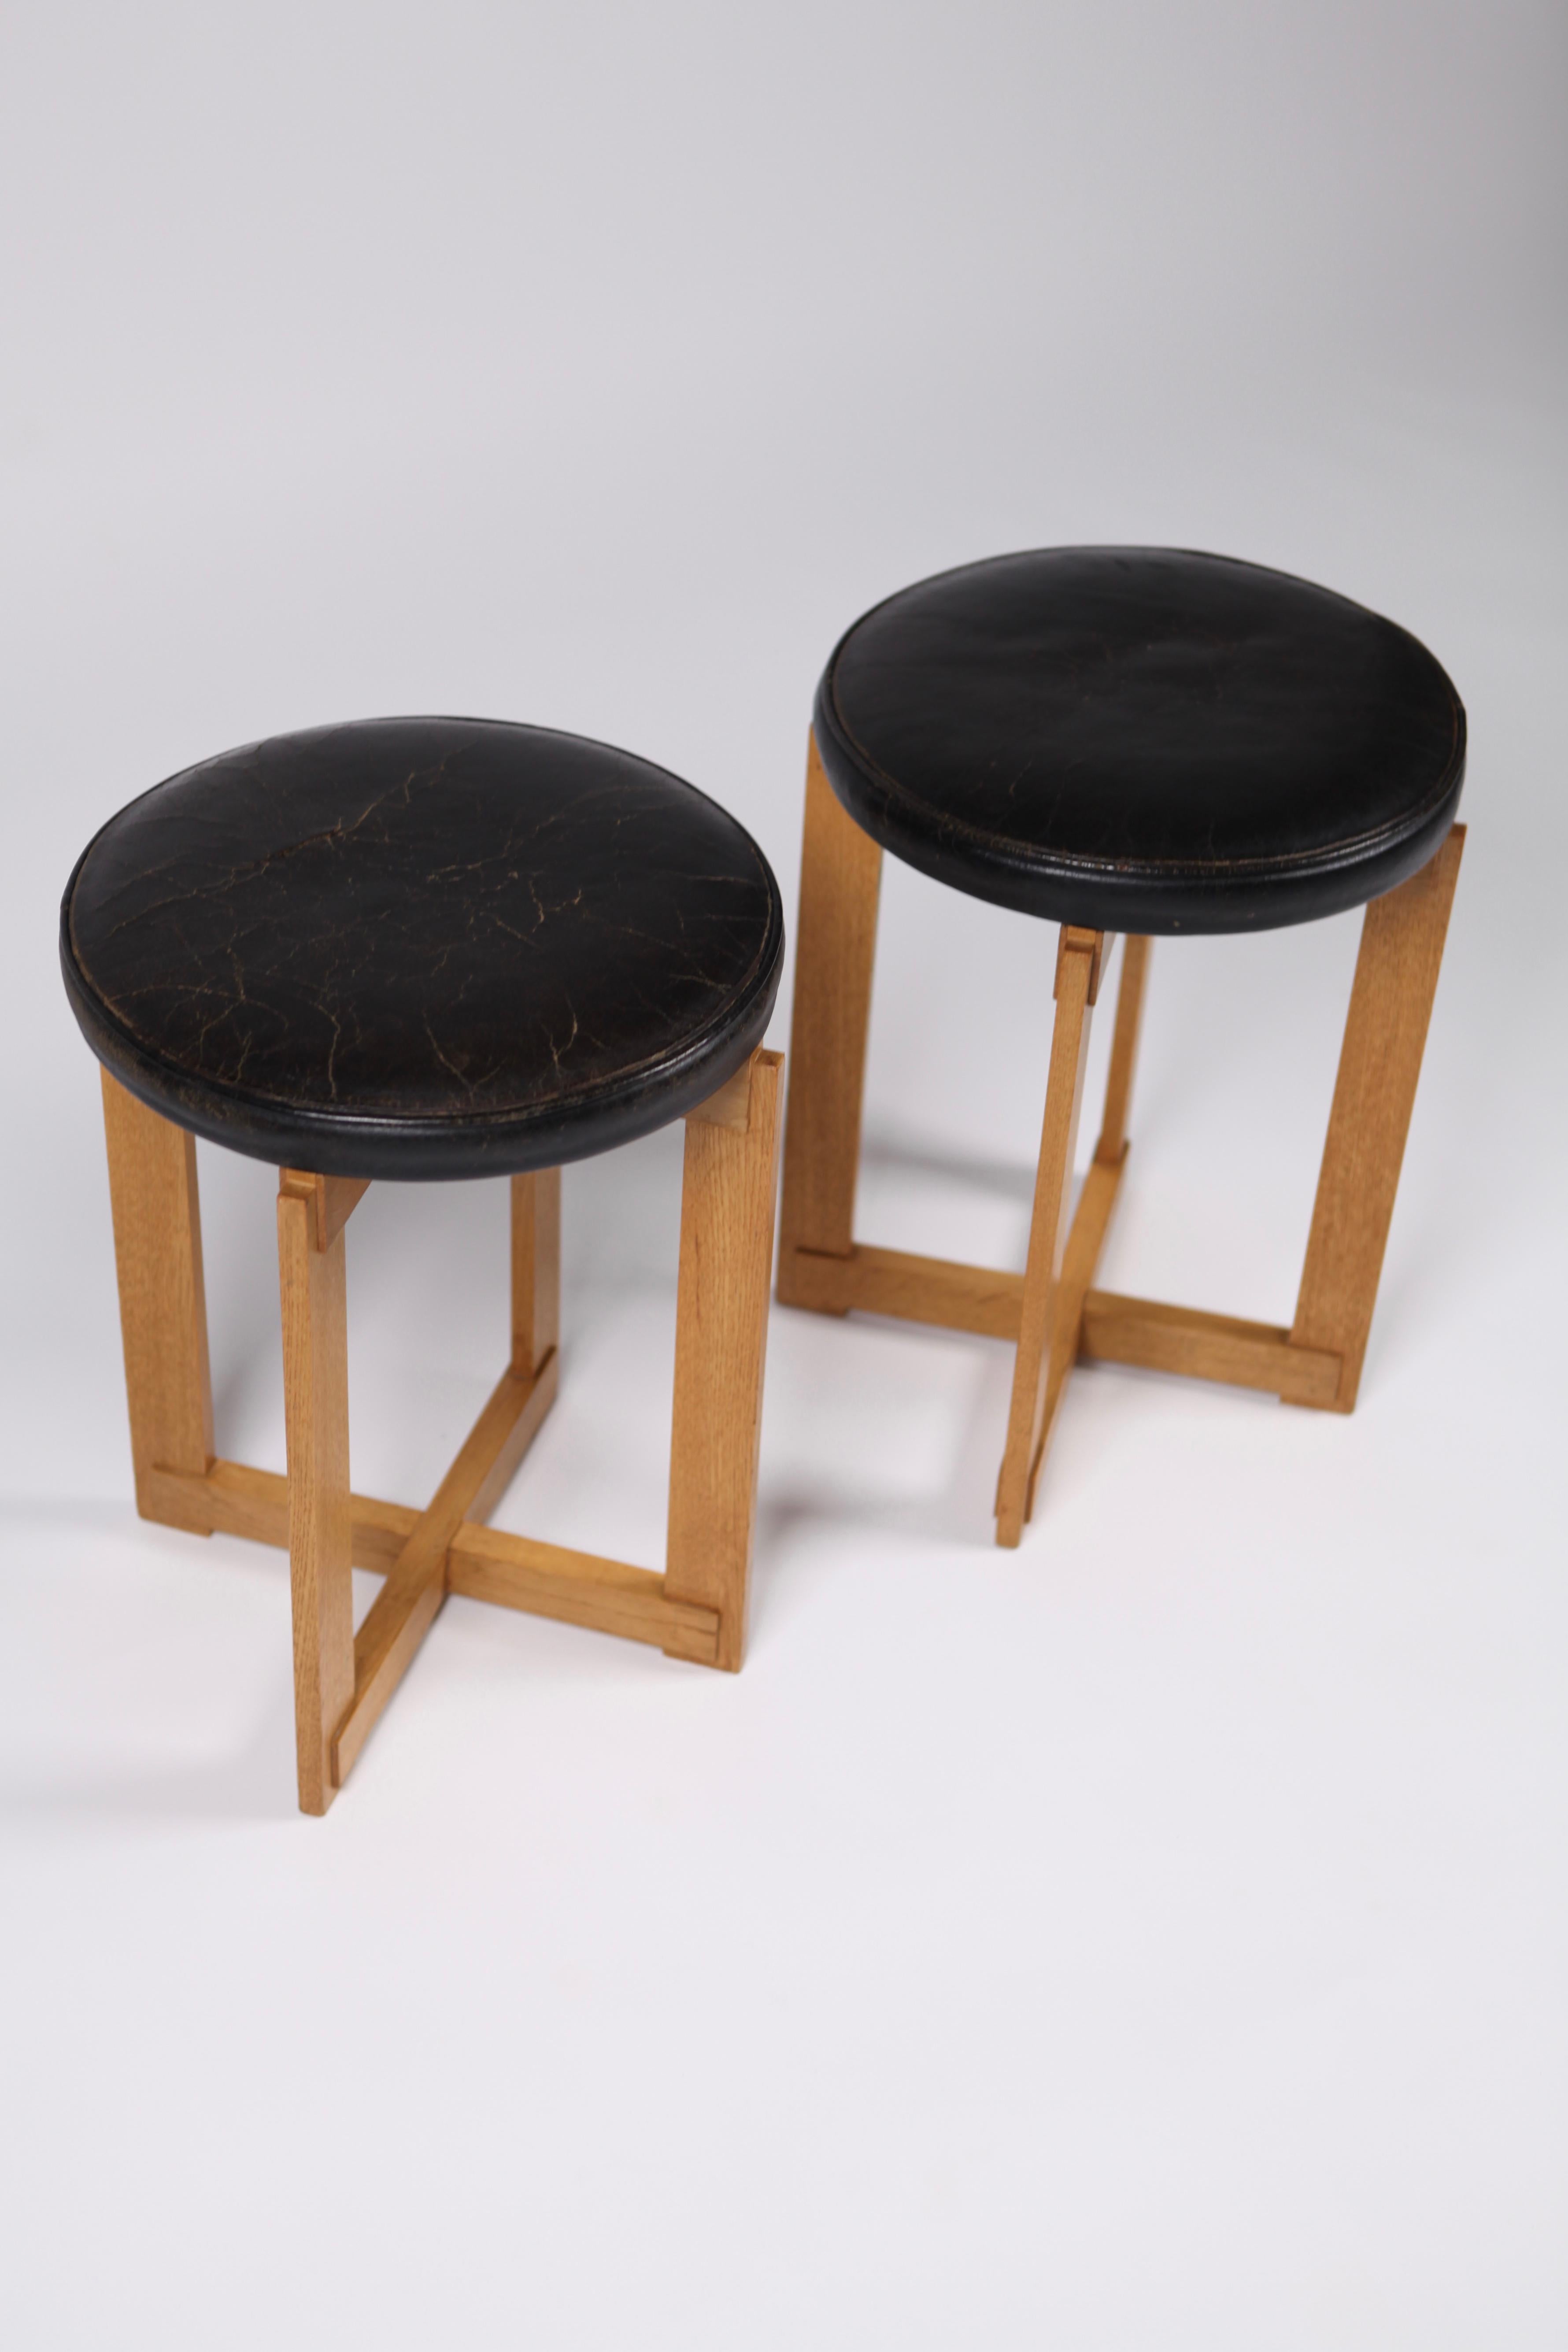 Swedish Uno & Östen Kristiansson, Rare Stools in Oak and Leather for Luxus, Sweden 1960s